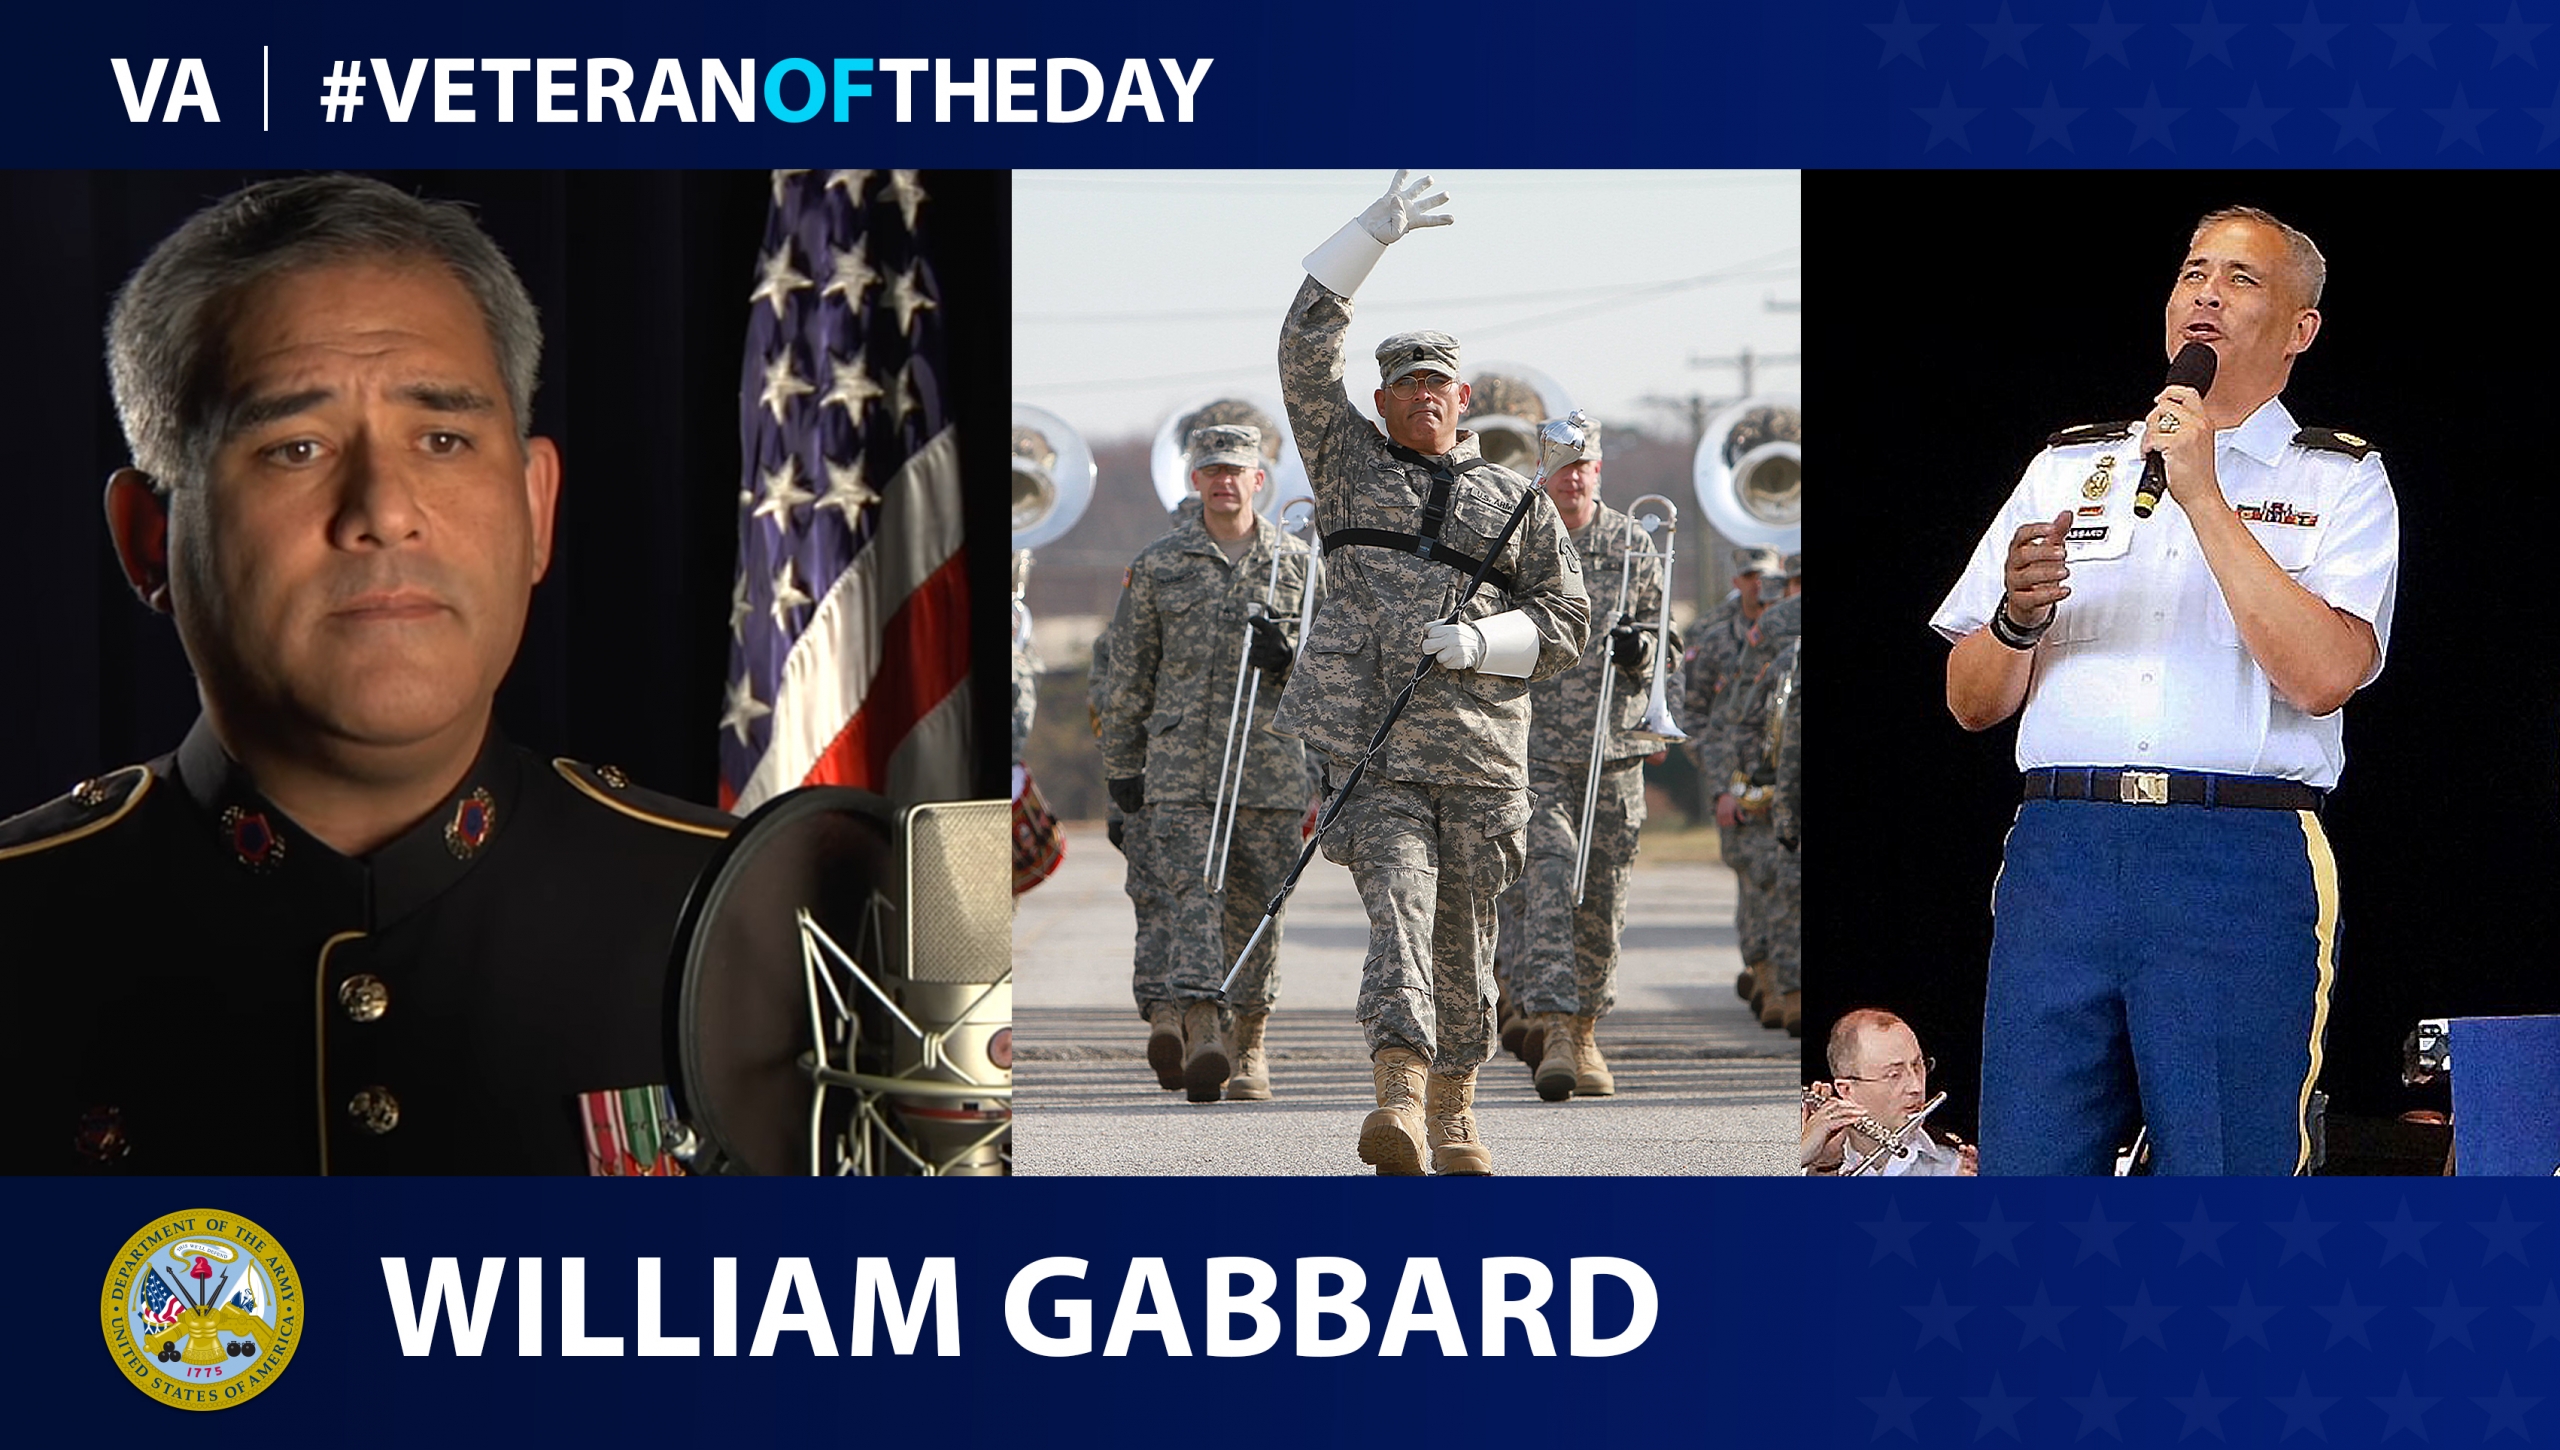 Army Veteran William Gabbard is today’s Veteran of the Day.